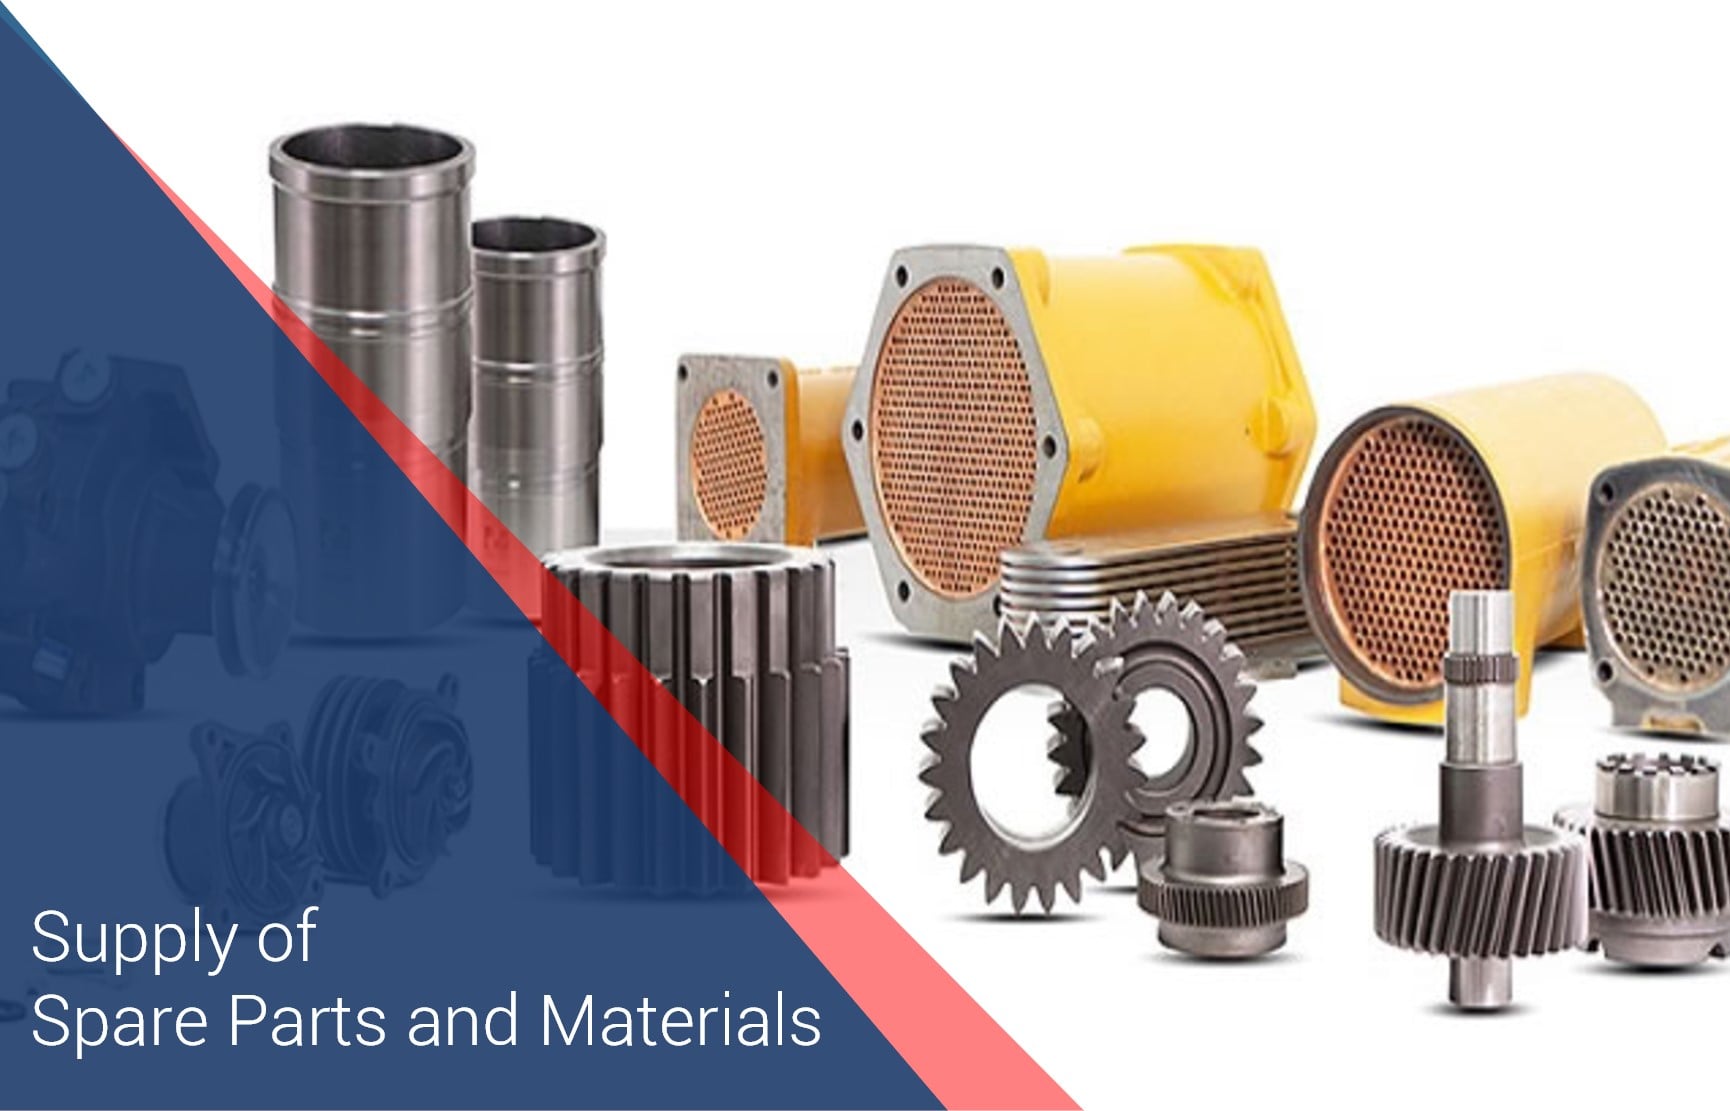 Supply of Spare Parts and Materials